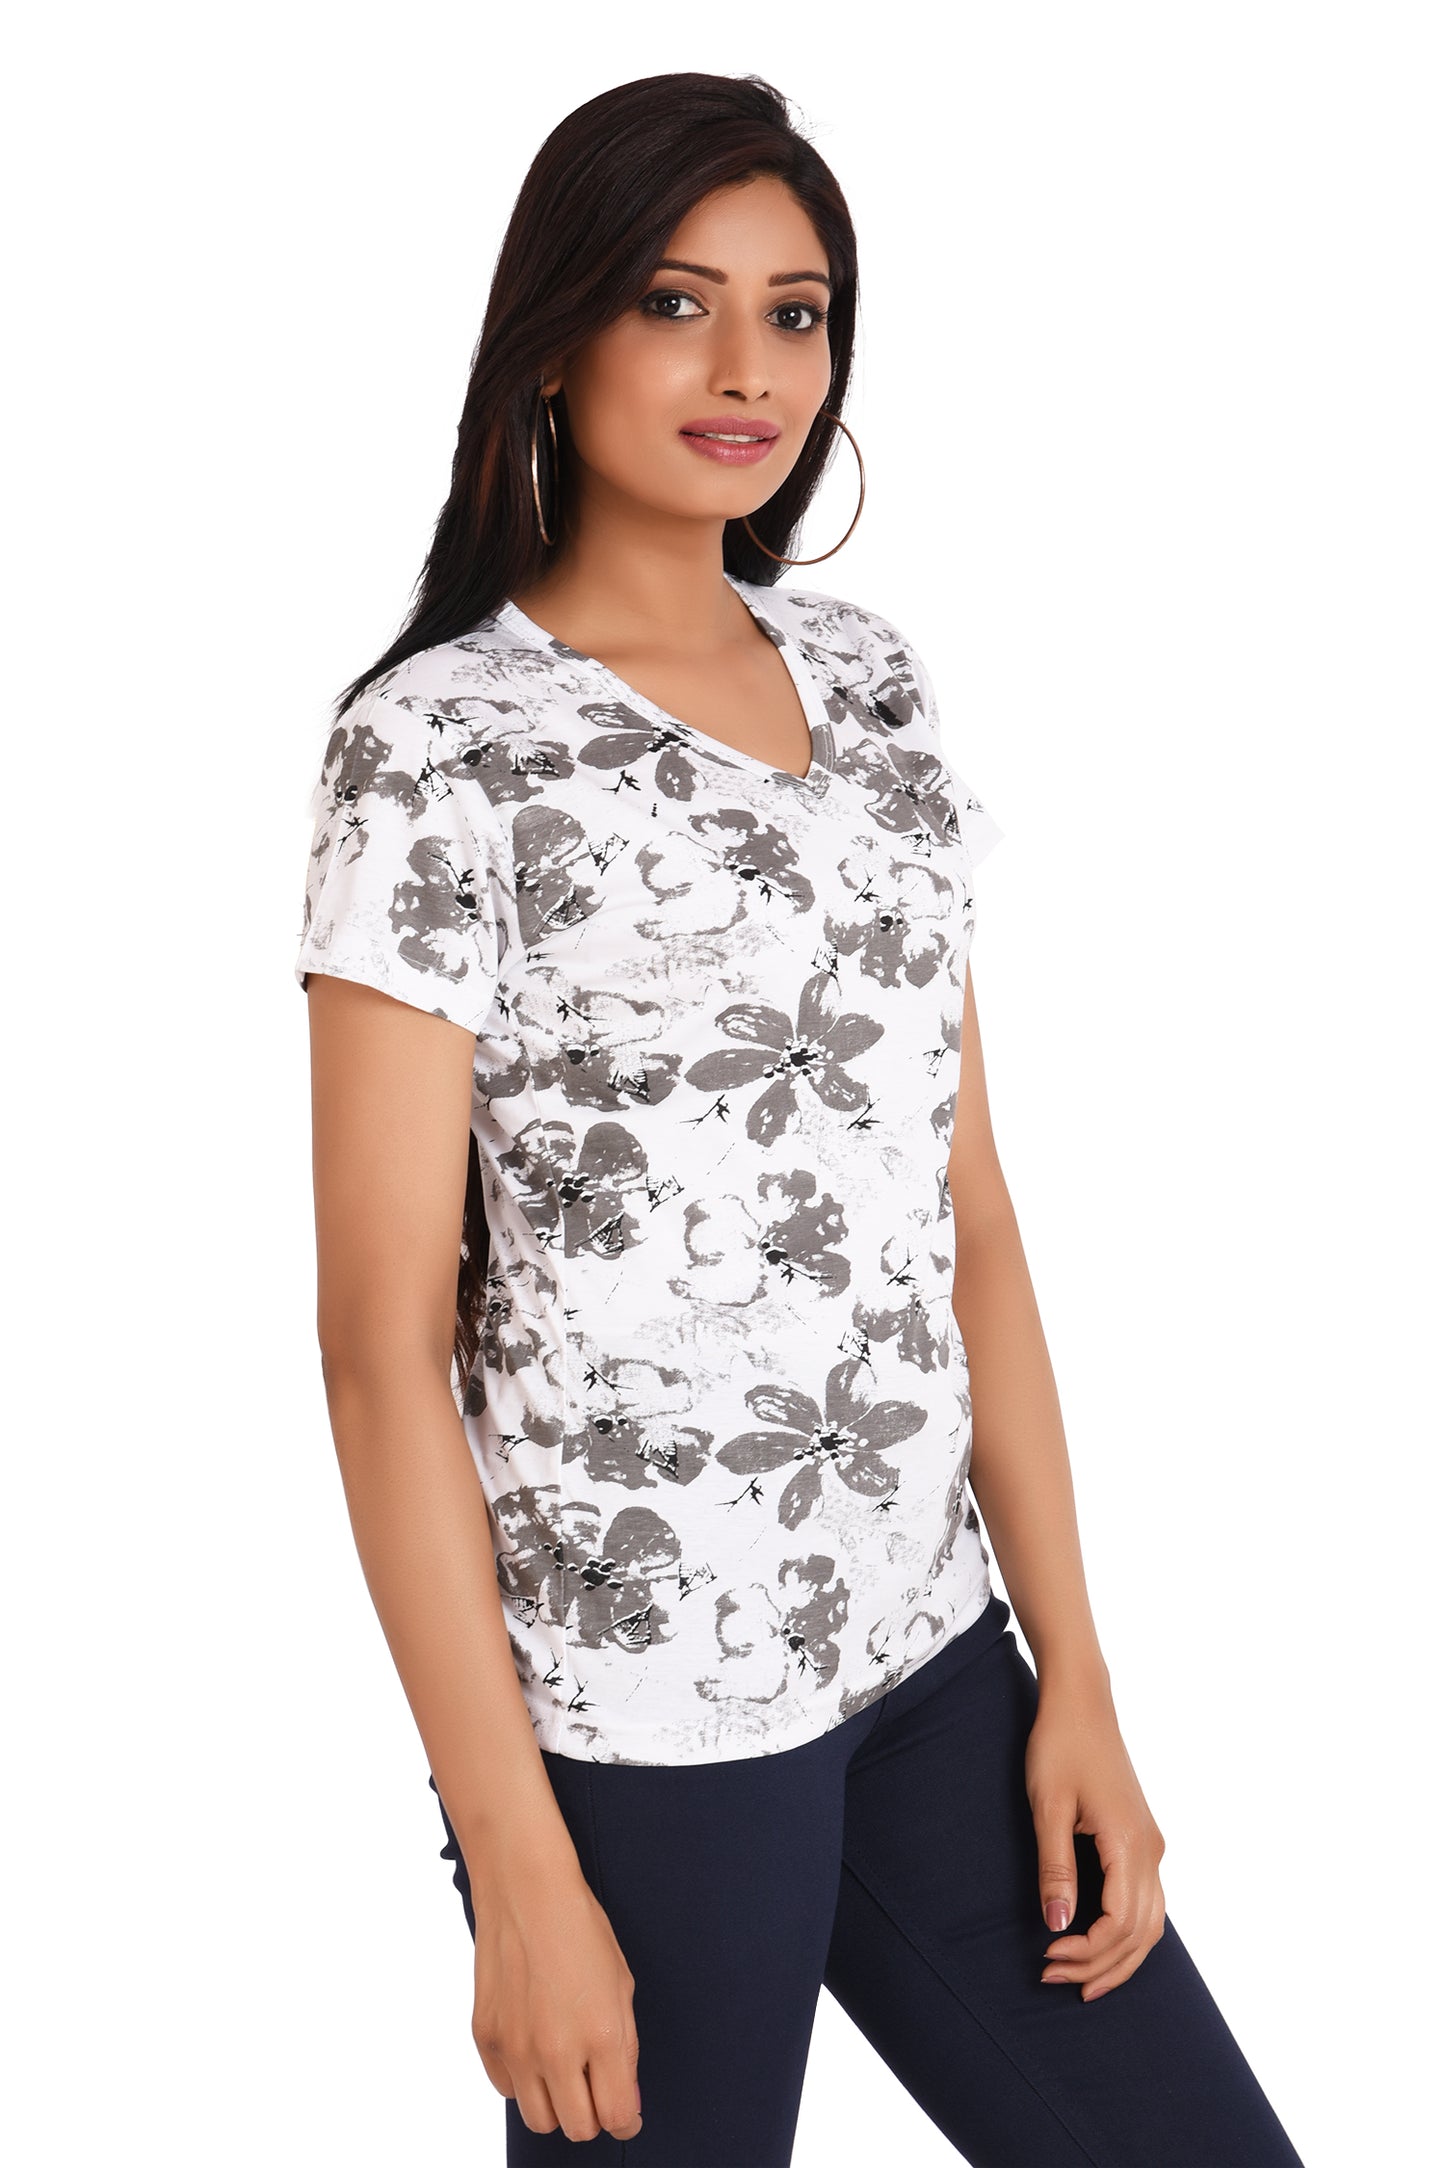 NEO GARMENTS Women's Cotton Round Neck PLUS size All Over Print T-shirt | FLOWERS | SIZE FROM S-32" TO 8XL-52".